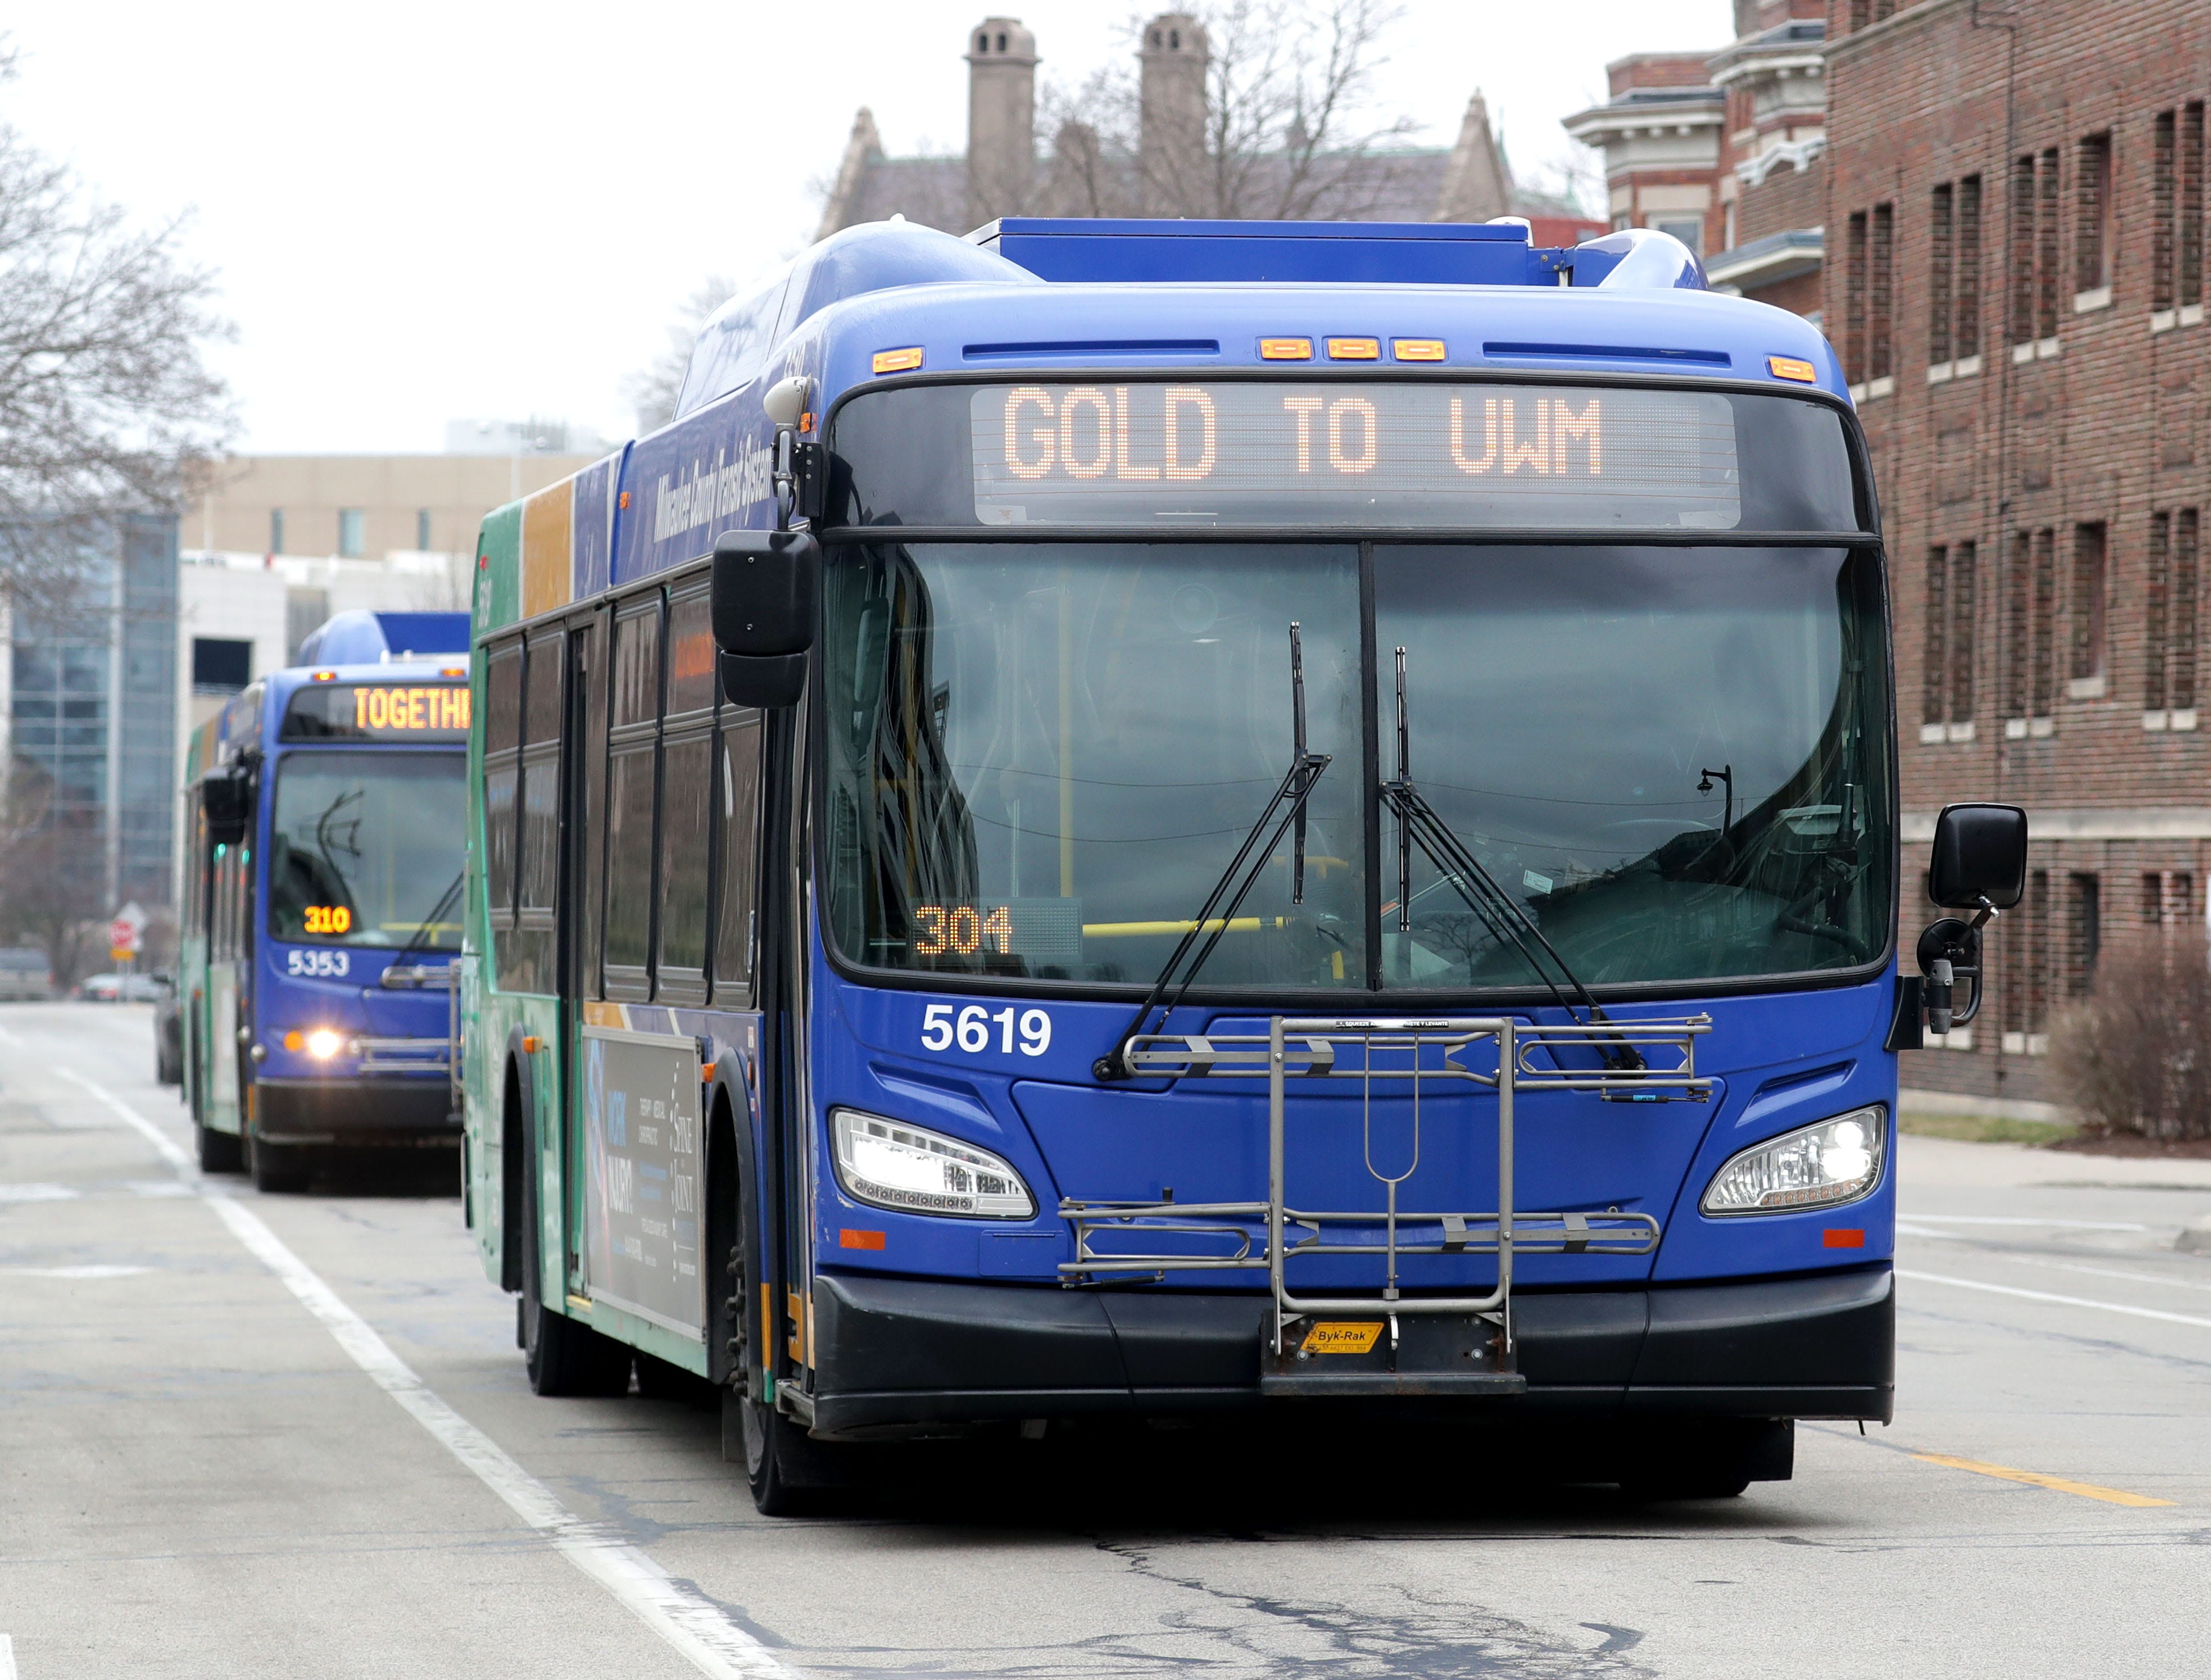 Bus riders don't have to wear masks as Milwaukee County shifts to 'low' COVID-19 community risk level